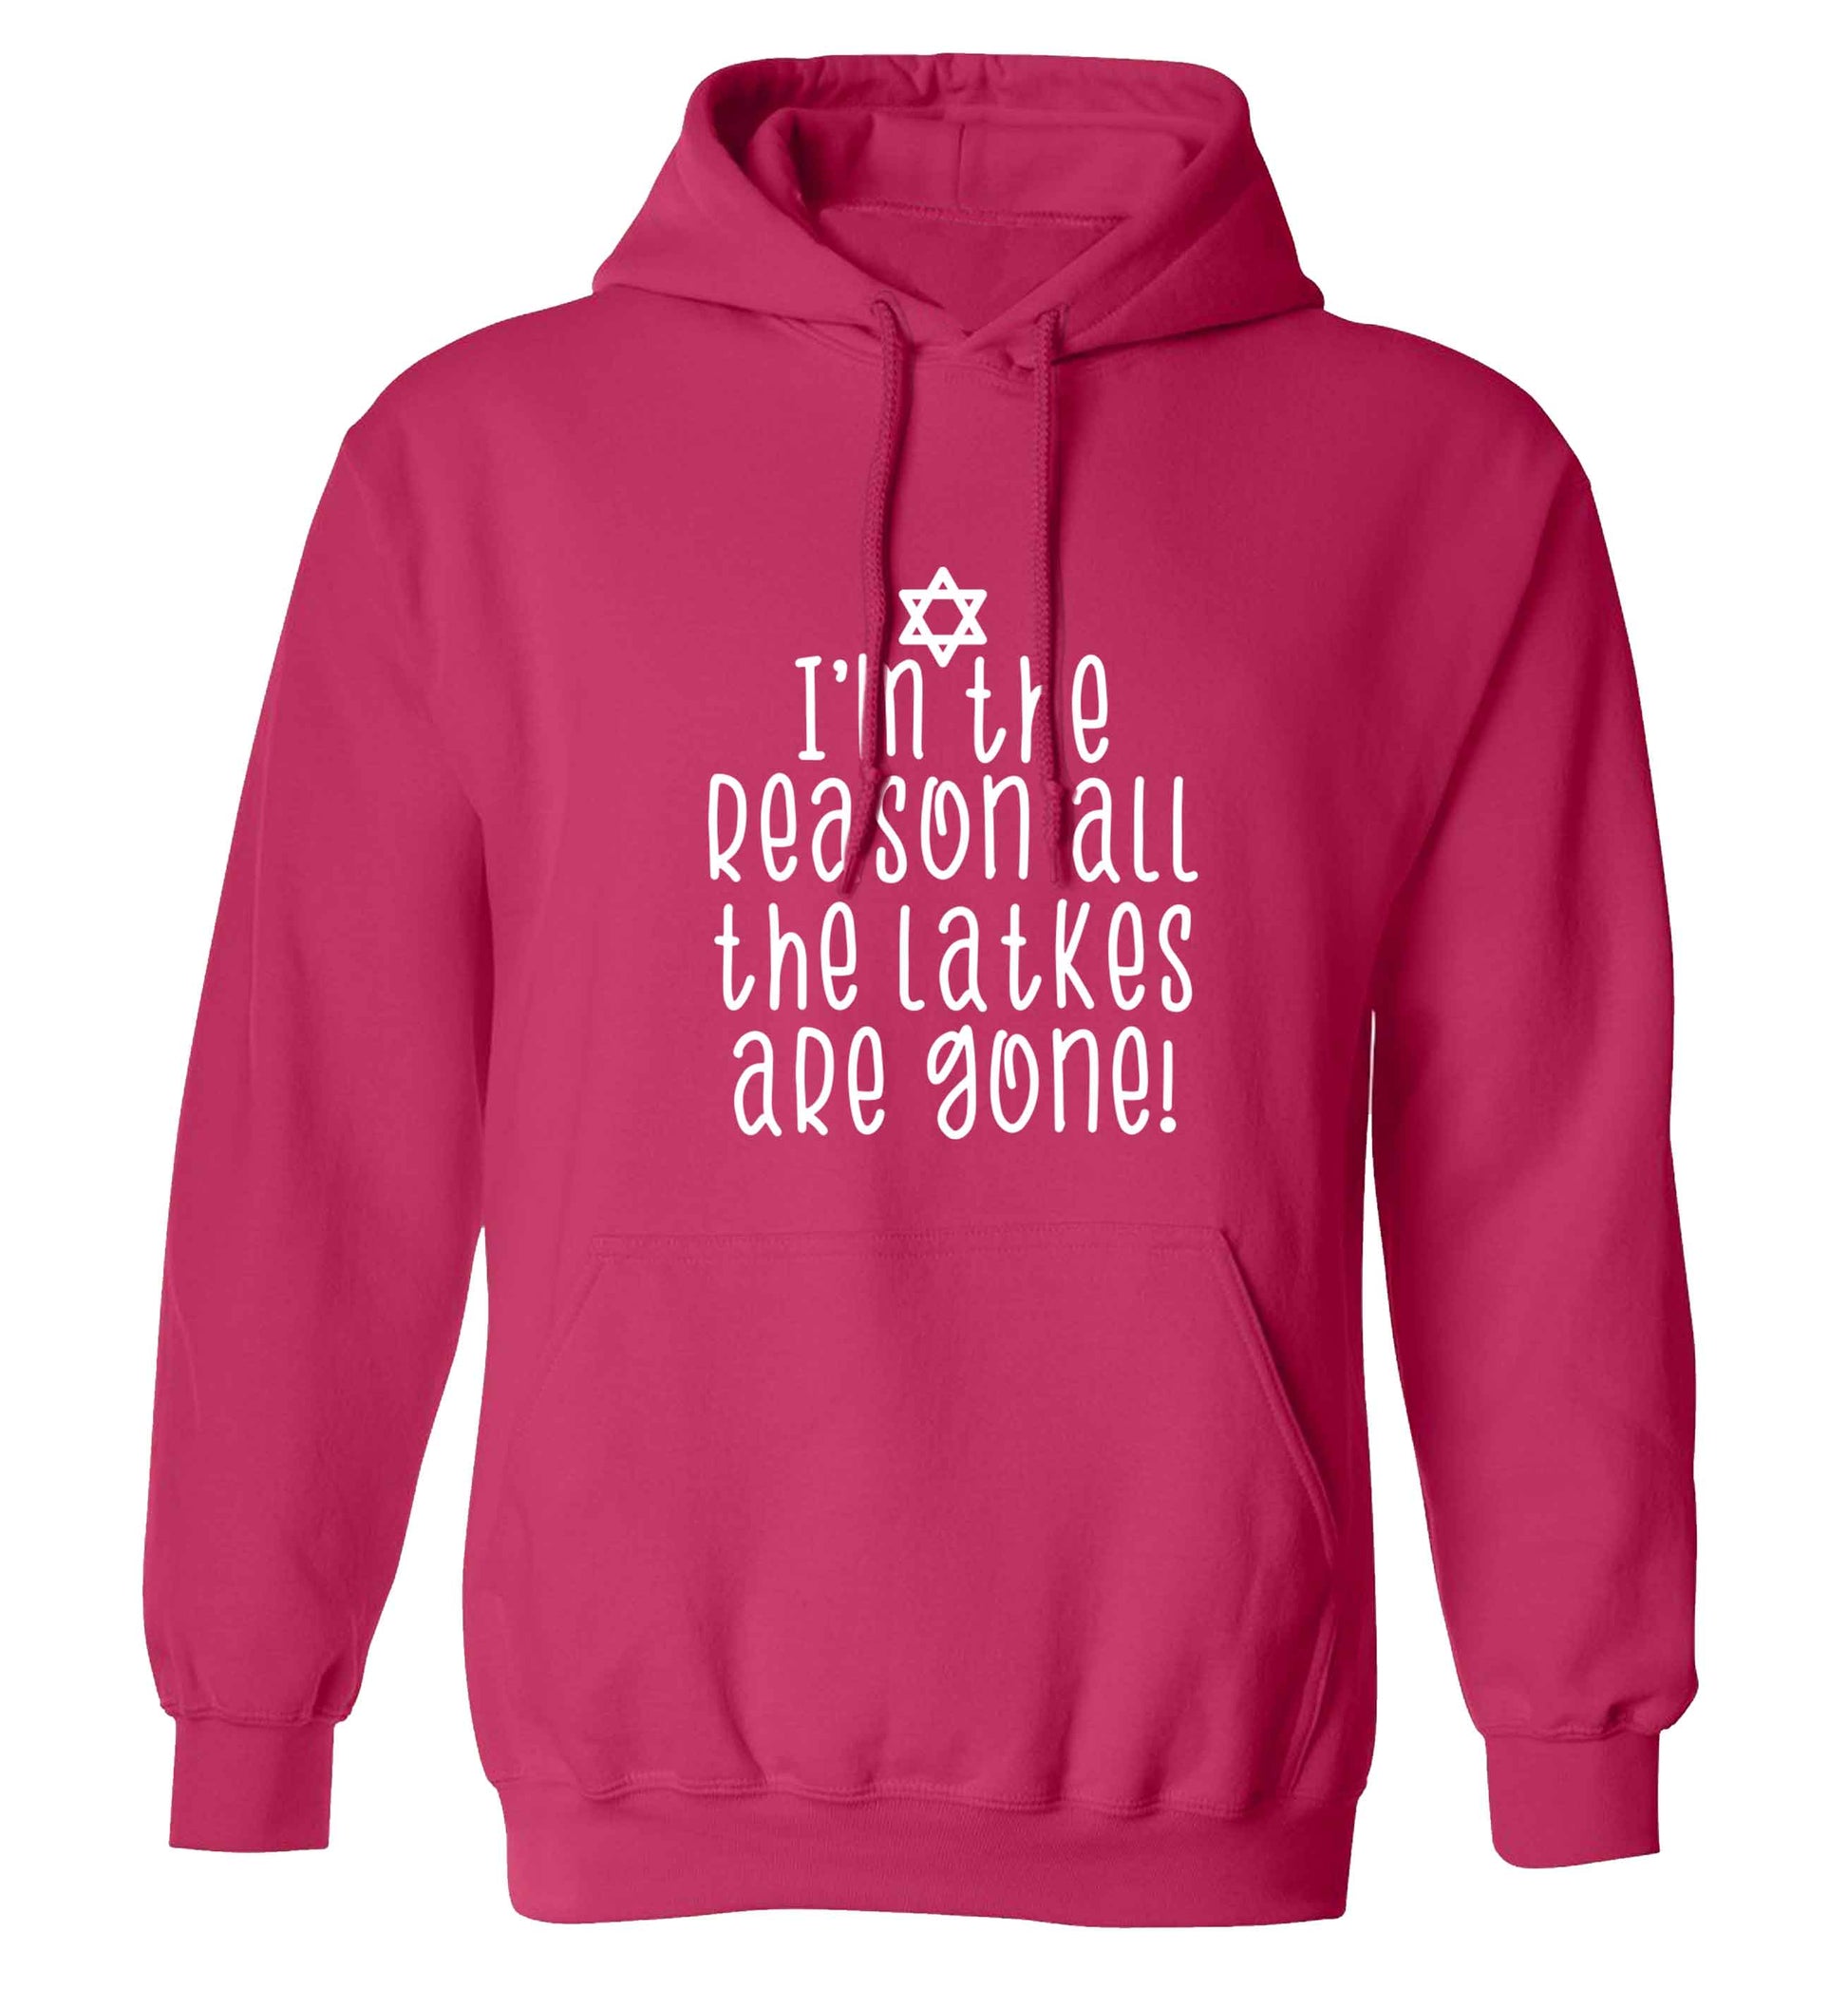 Happy challah days adults unisex pink hoodie 2XL